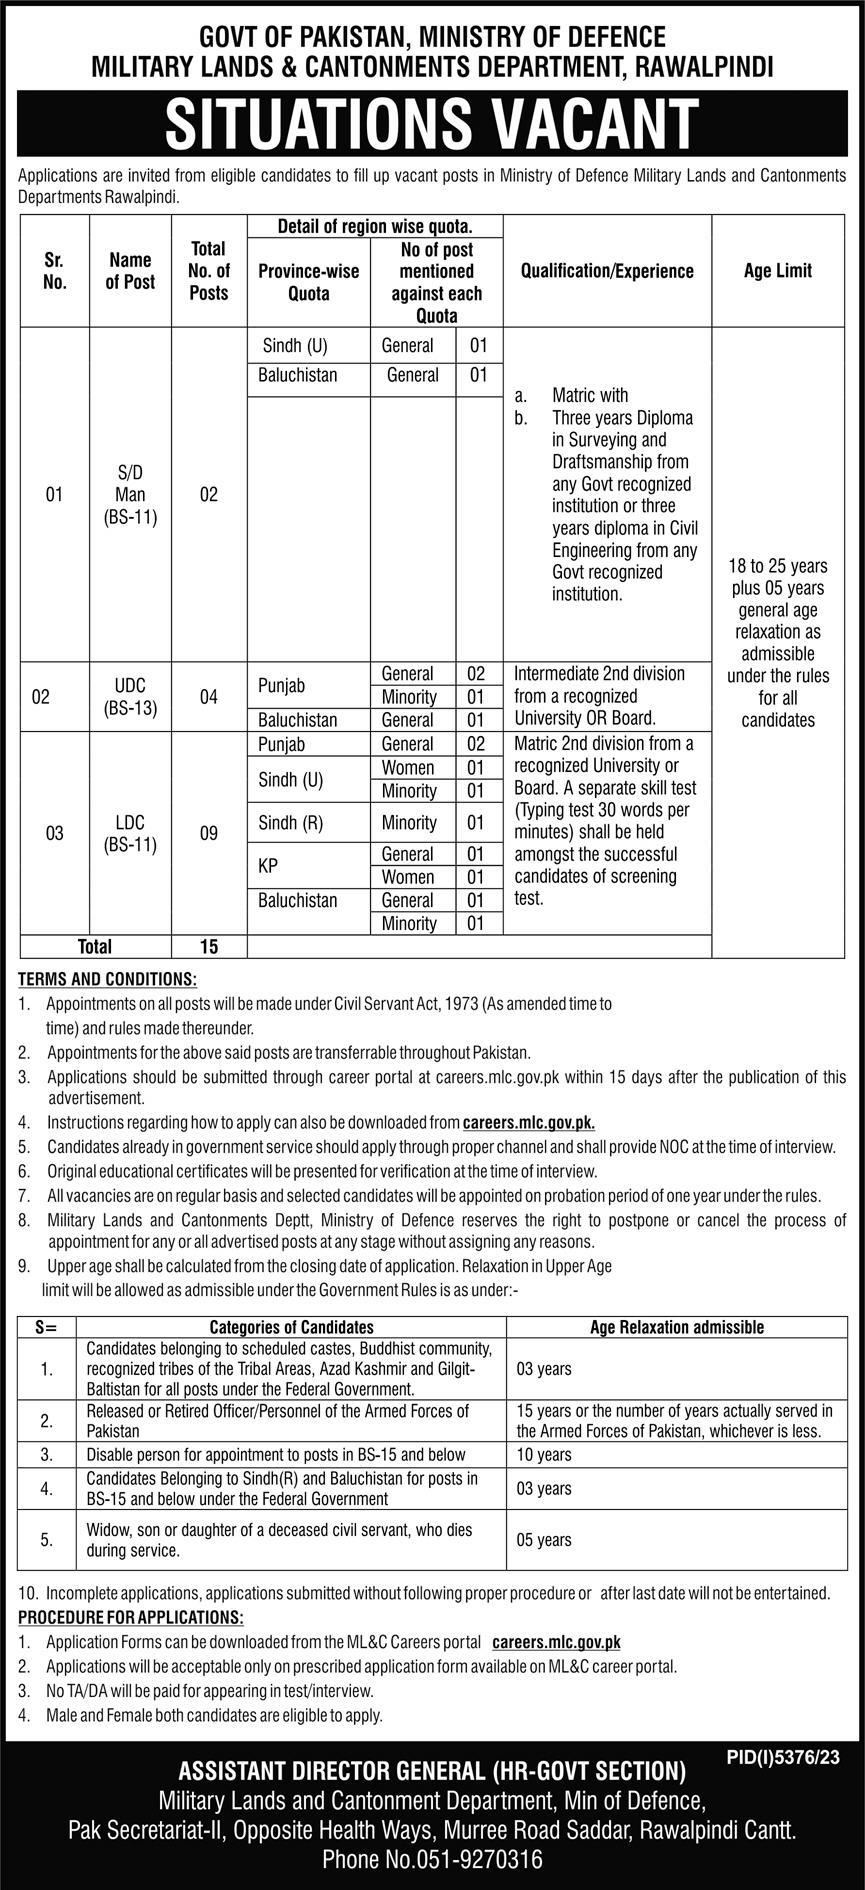 Military Lands And Cantonments Department Jobs S/D Man,UDC, LDC Vacancies in army